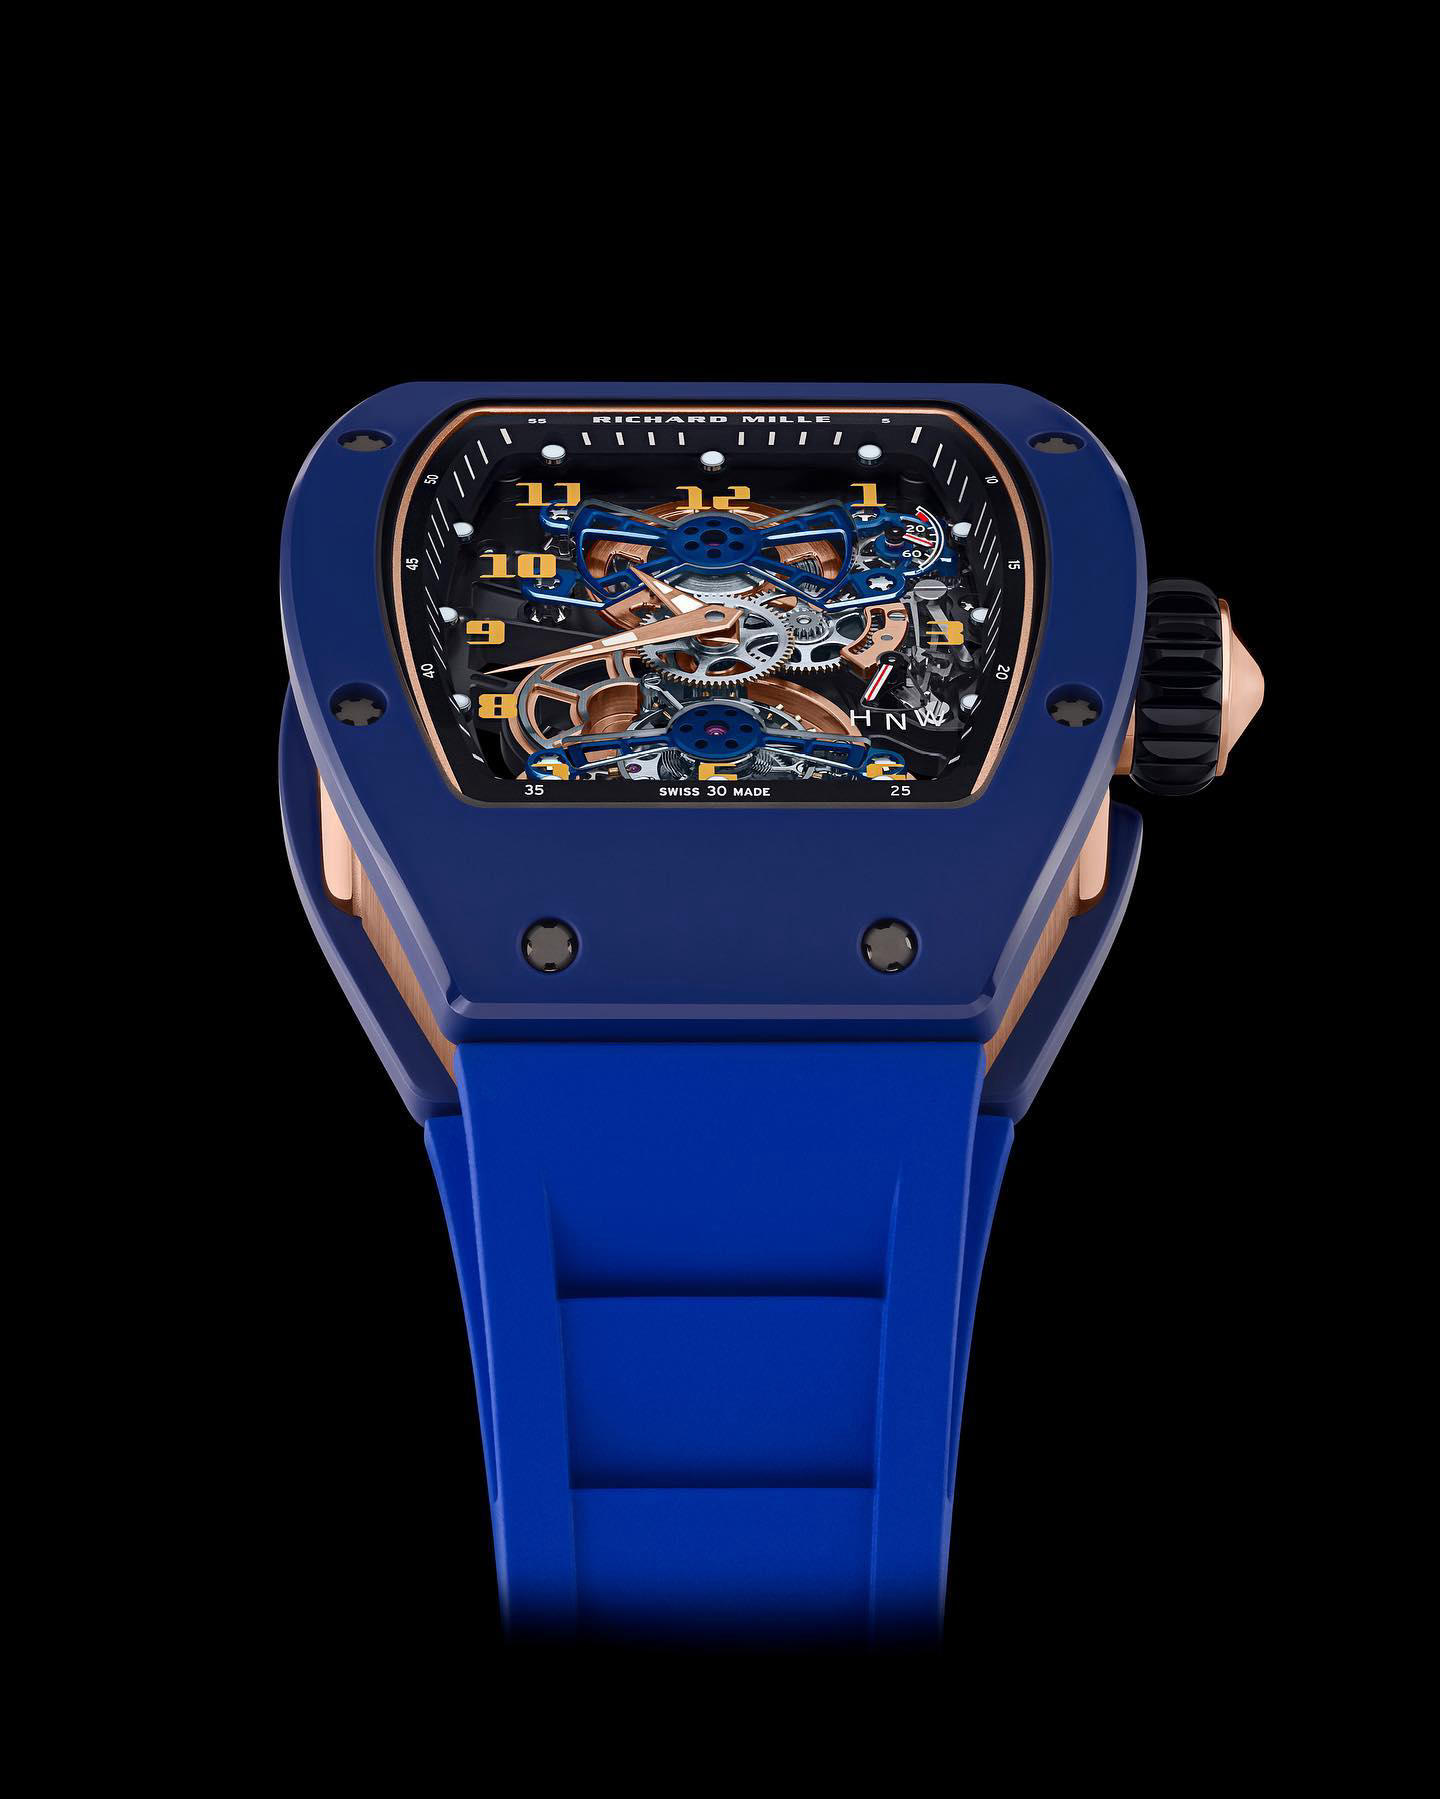 Richard Mille - Creating the complex curved shapes in blue TZP ceramic requires a lengthy, delicate